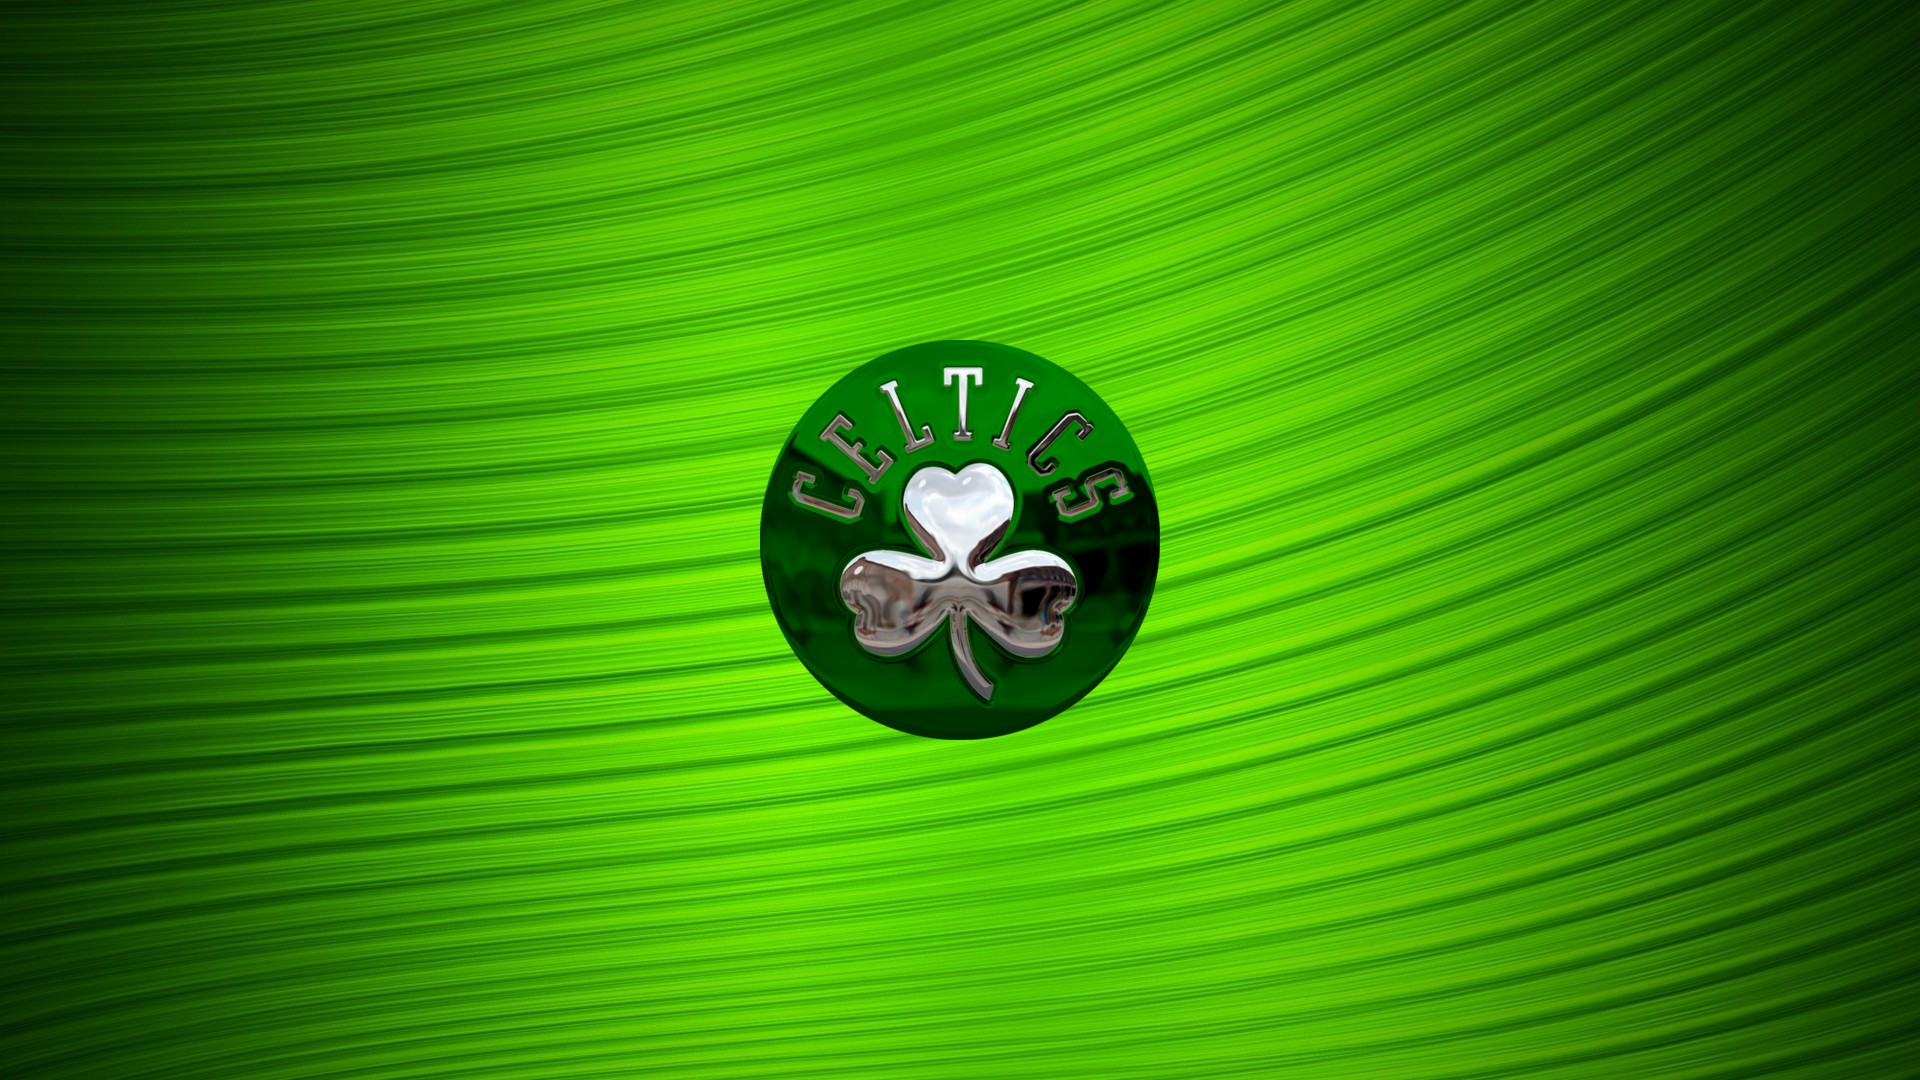 HD Desktop Wallpaper Boston Celtics Logo with image dimensions 1920x1080 pixel. You can make this wallpaper for your Desktop Computer Backgrounds, Windows or Mac Screensavers, iPhone Lock screen, Tablet or Android and another Mobile Phone device